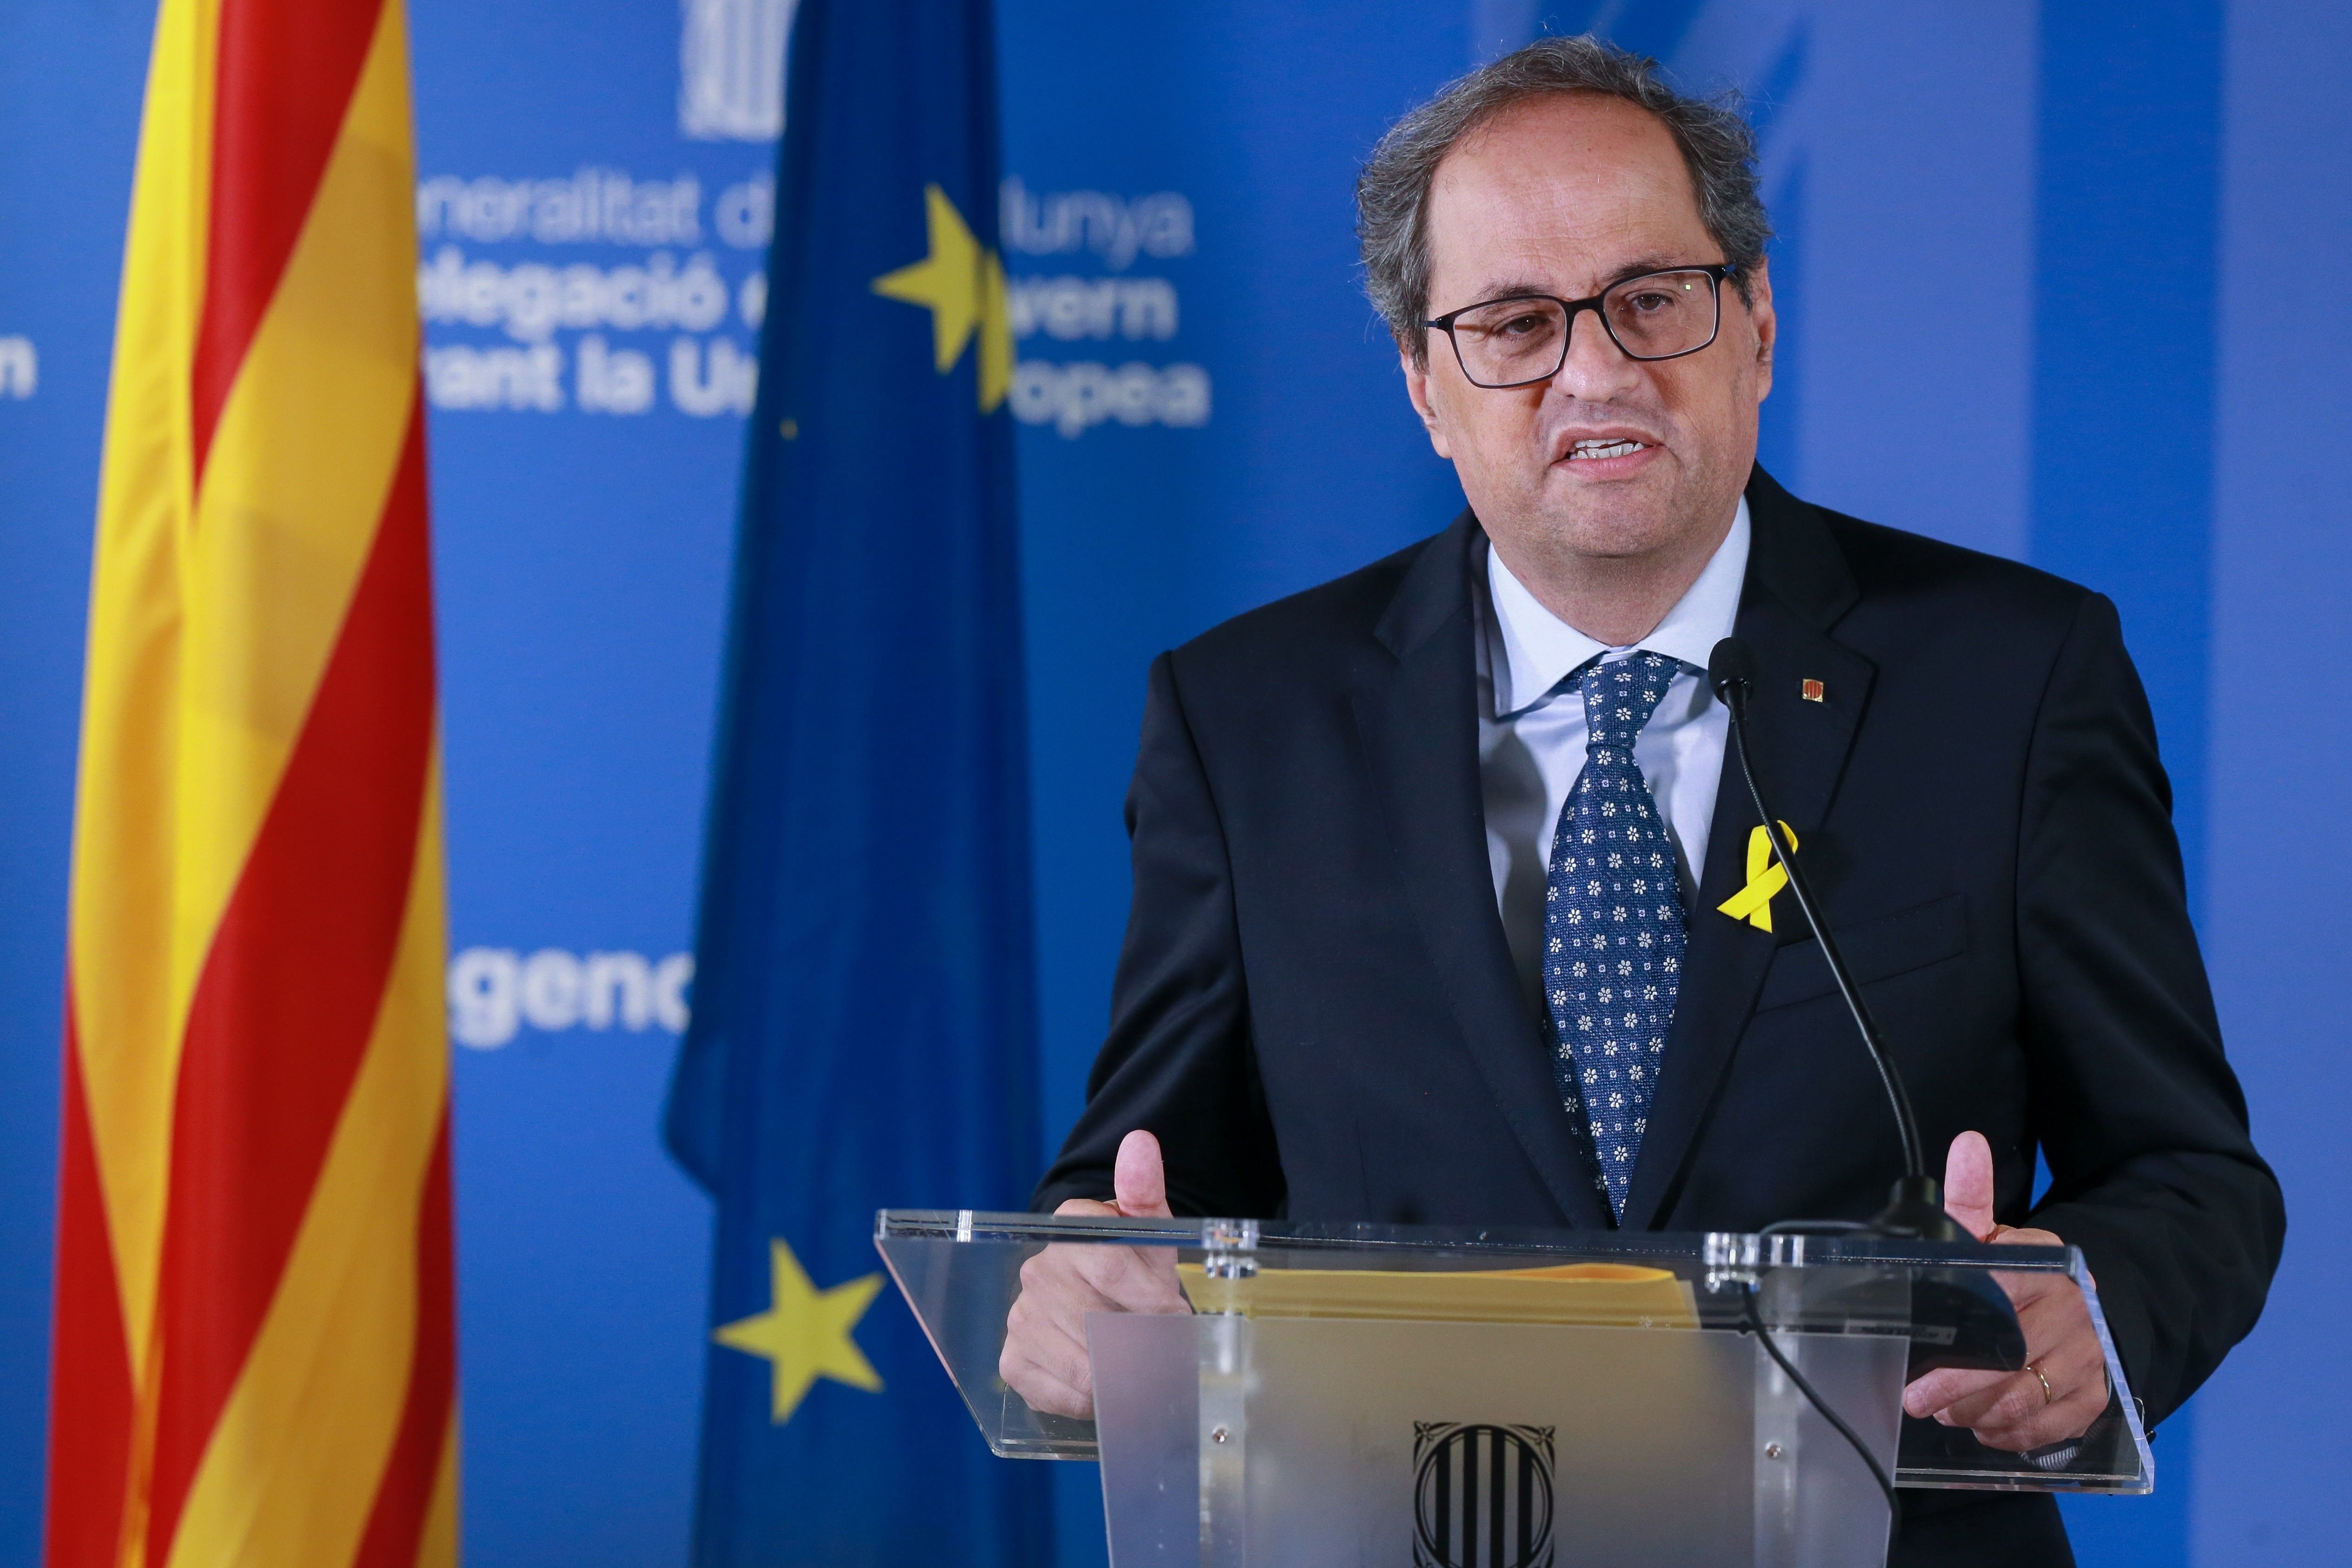 President Torra to be in Strasbourg 2nd July for the opening of the European Parliament